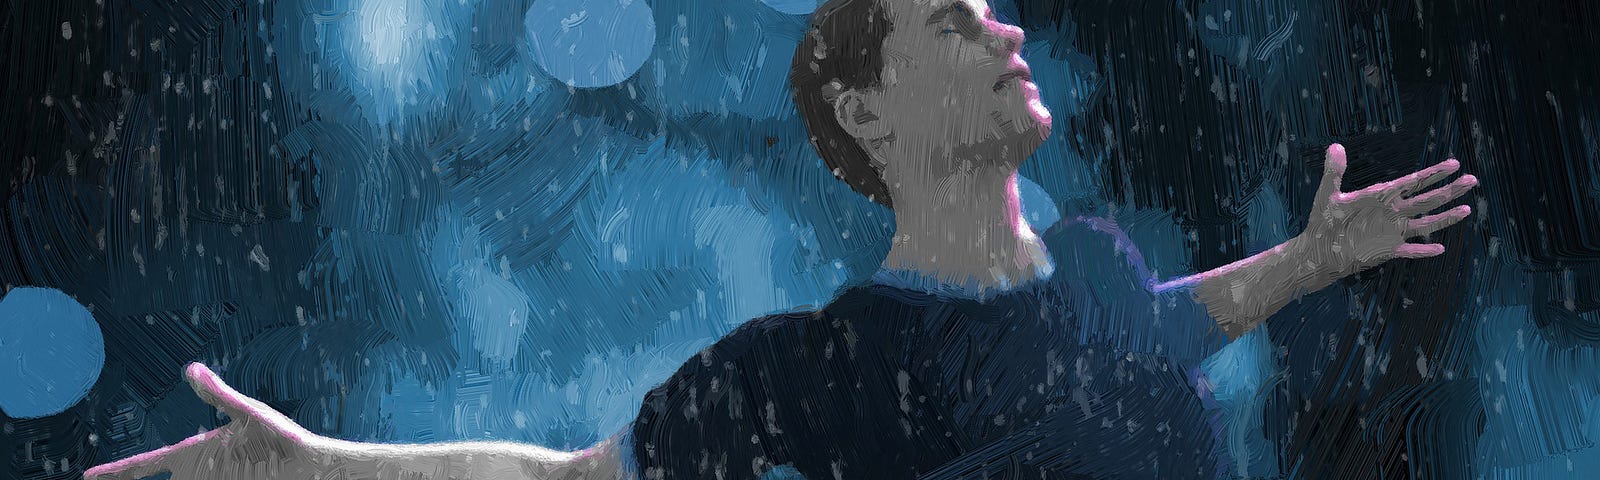 A man in a blue shirt against a blue background. His eyes are closed and his arms are open wide. It is raining on him.